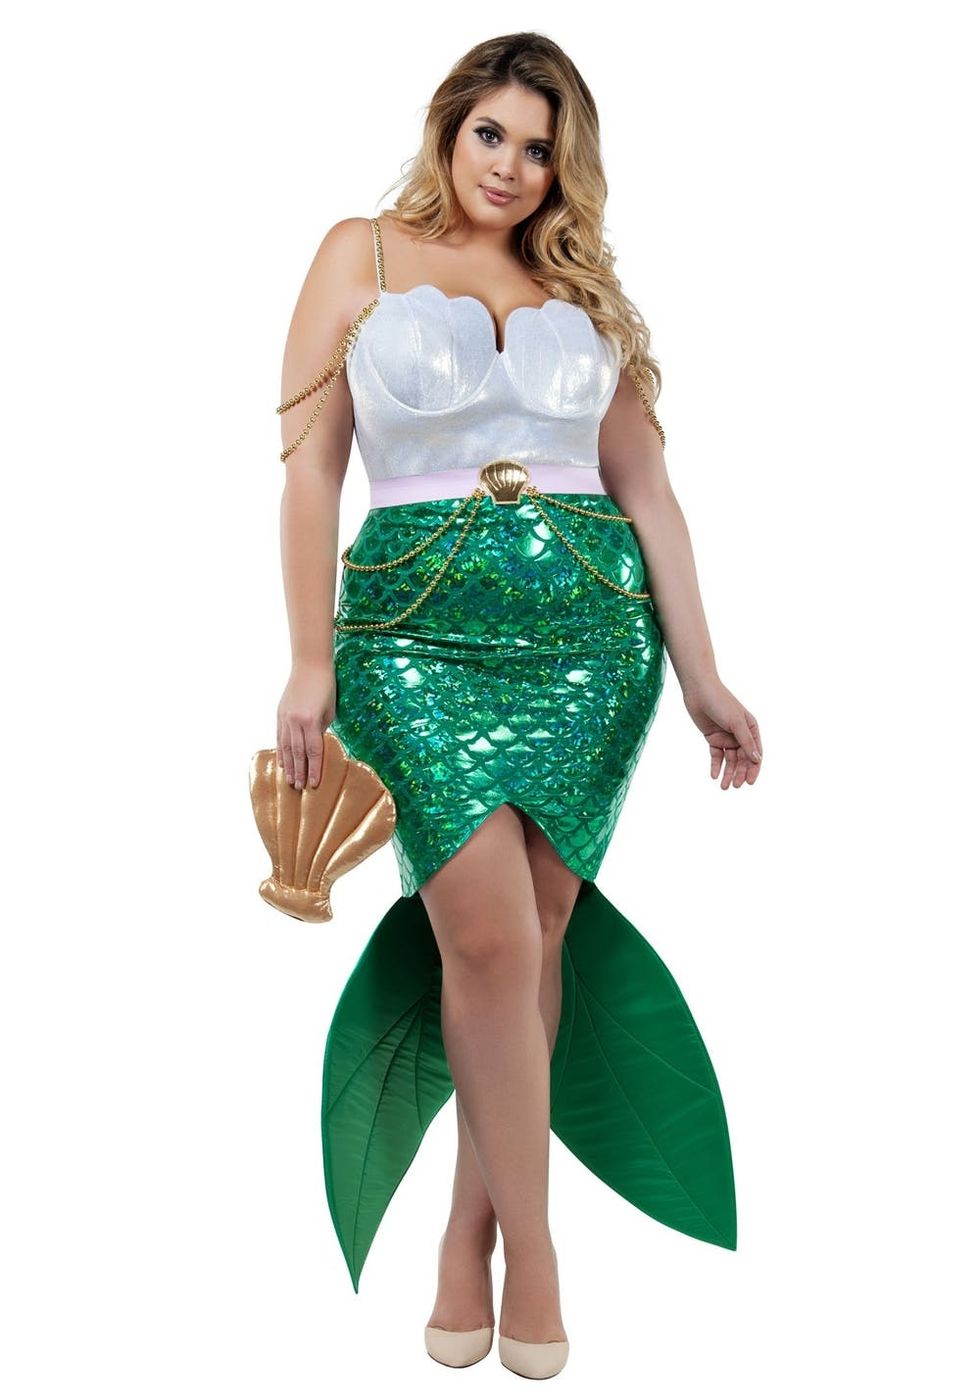 40 Plus-Size Halloween Costume Ideas To Complement Your Curves - Brit + Co